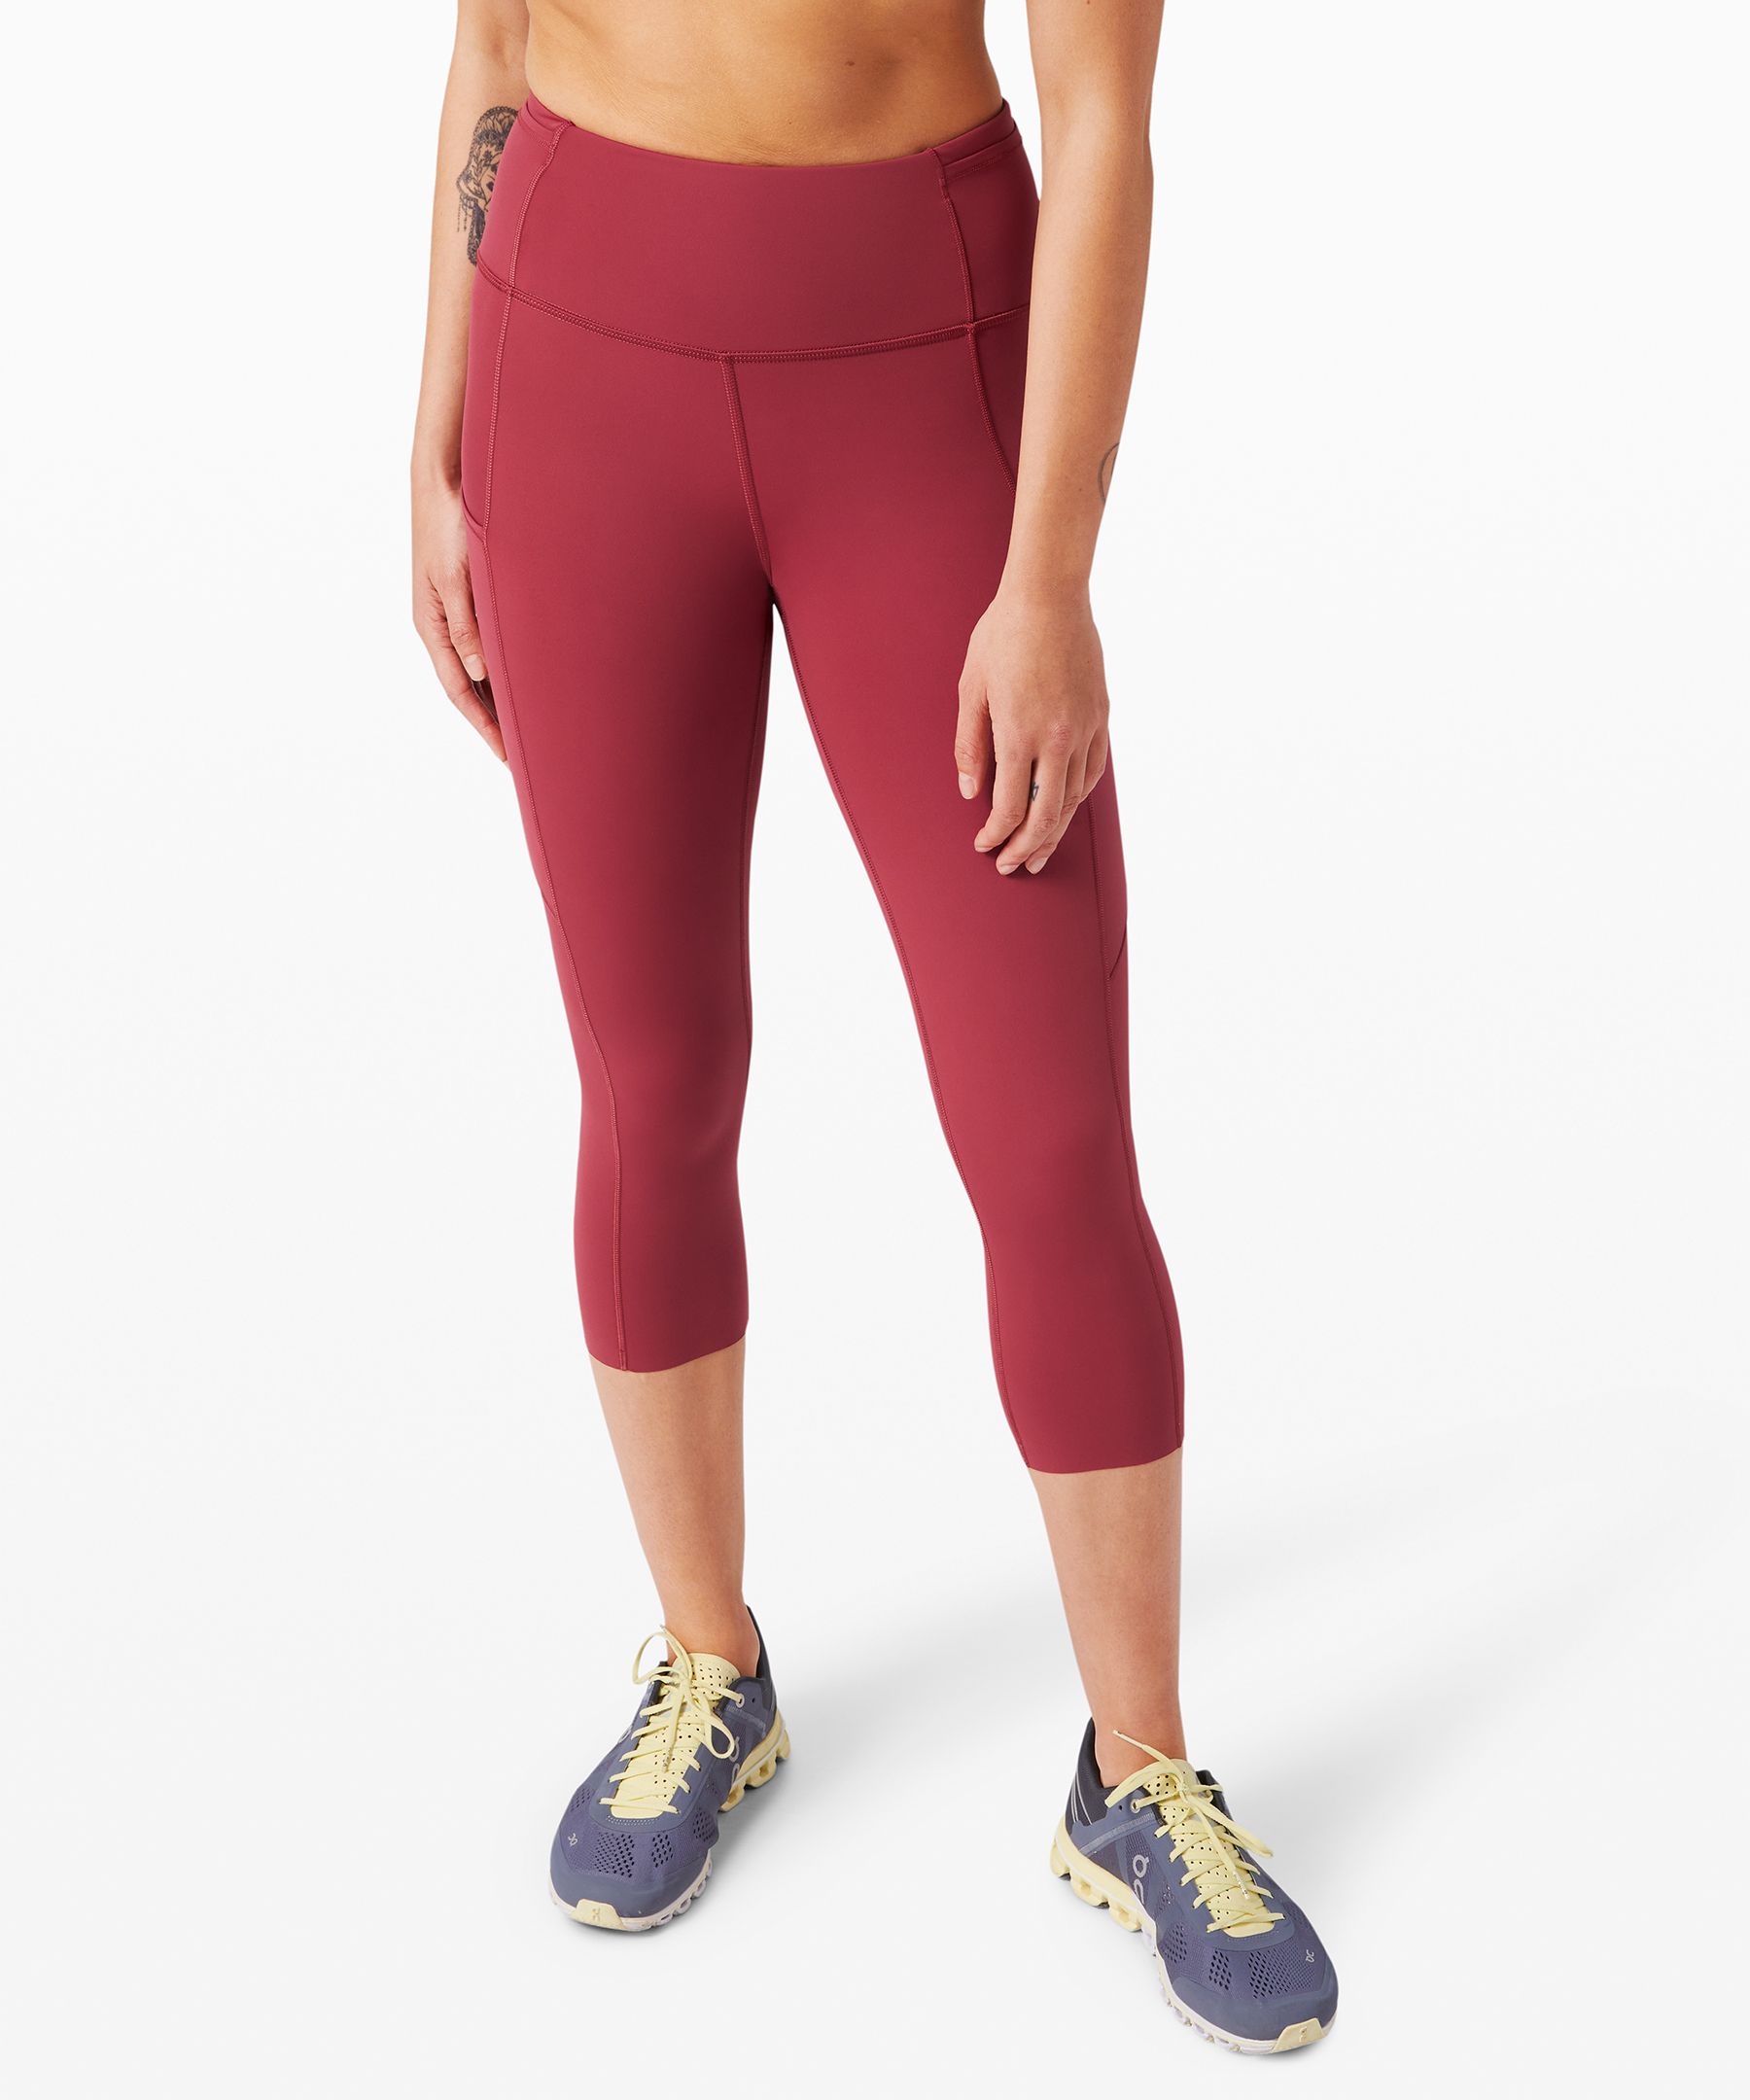 When Does Lululemon Restock 'We Made Too Much' Online? - Playbite